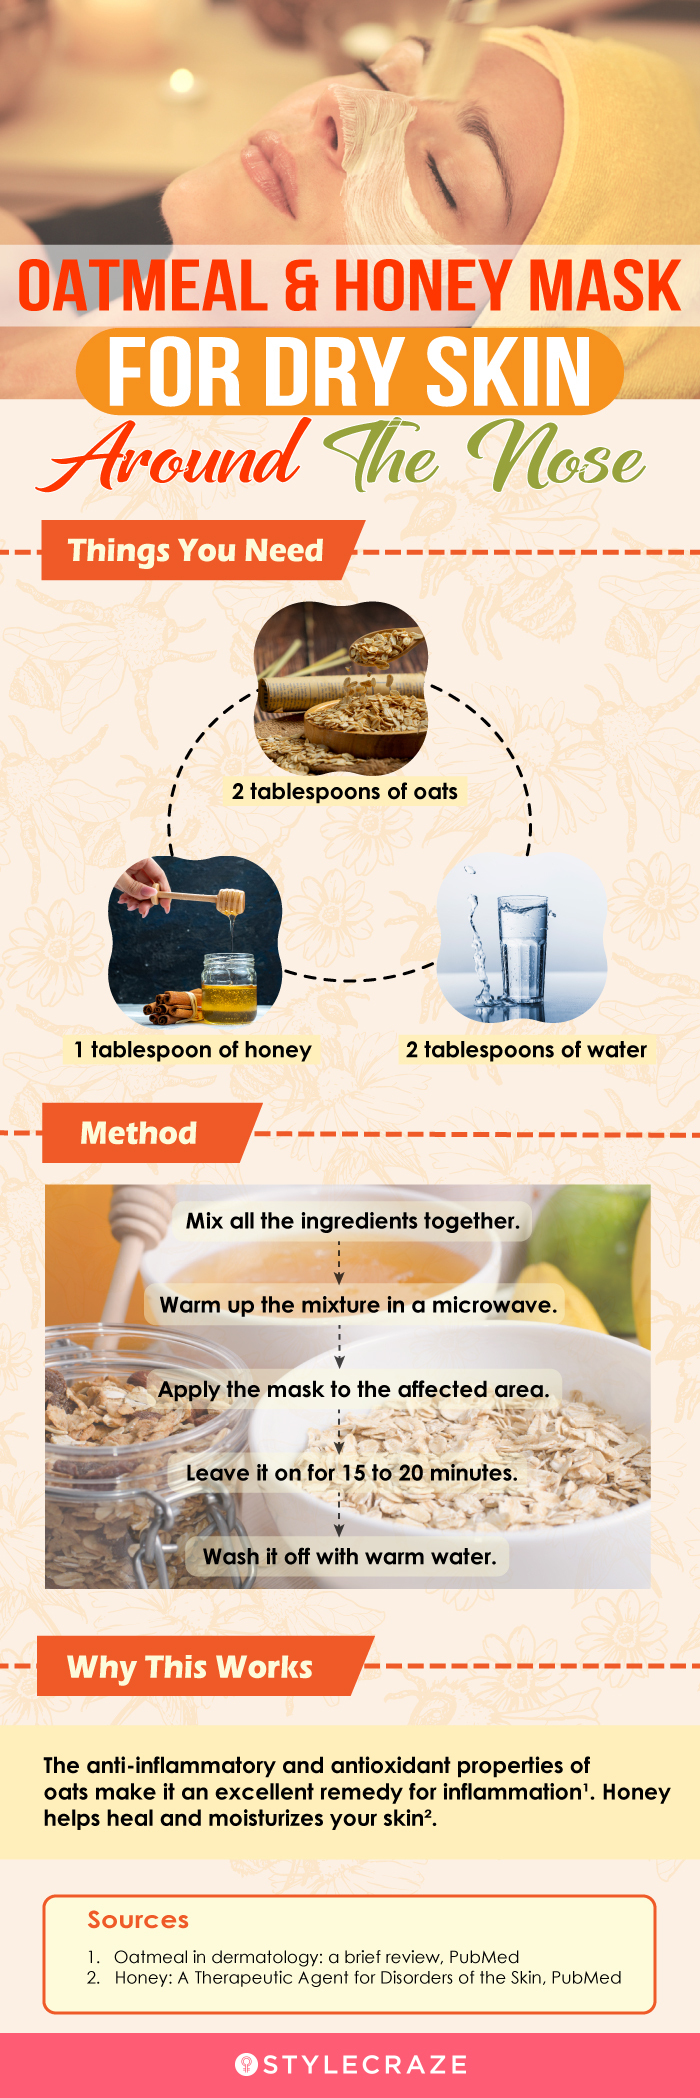 oatmeal & honey mask for dry skin around the nose [infographic]